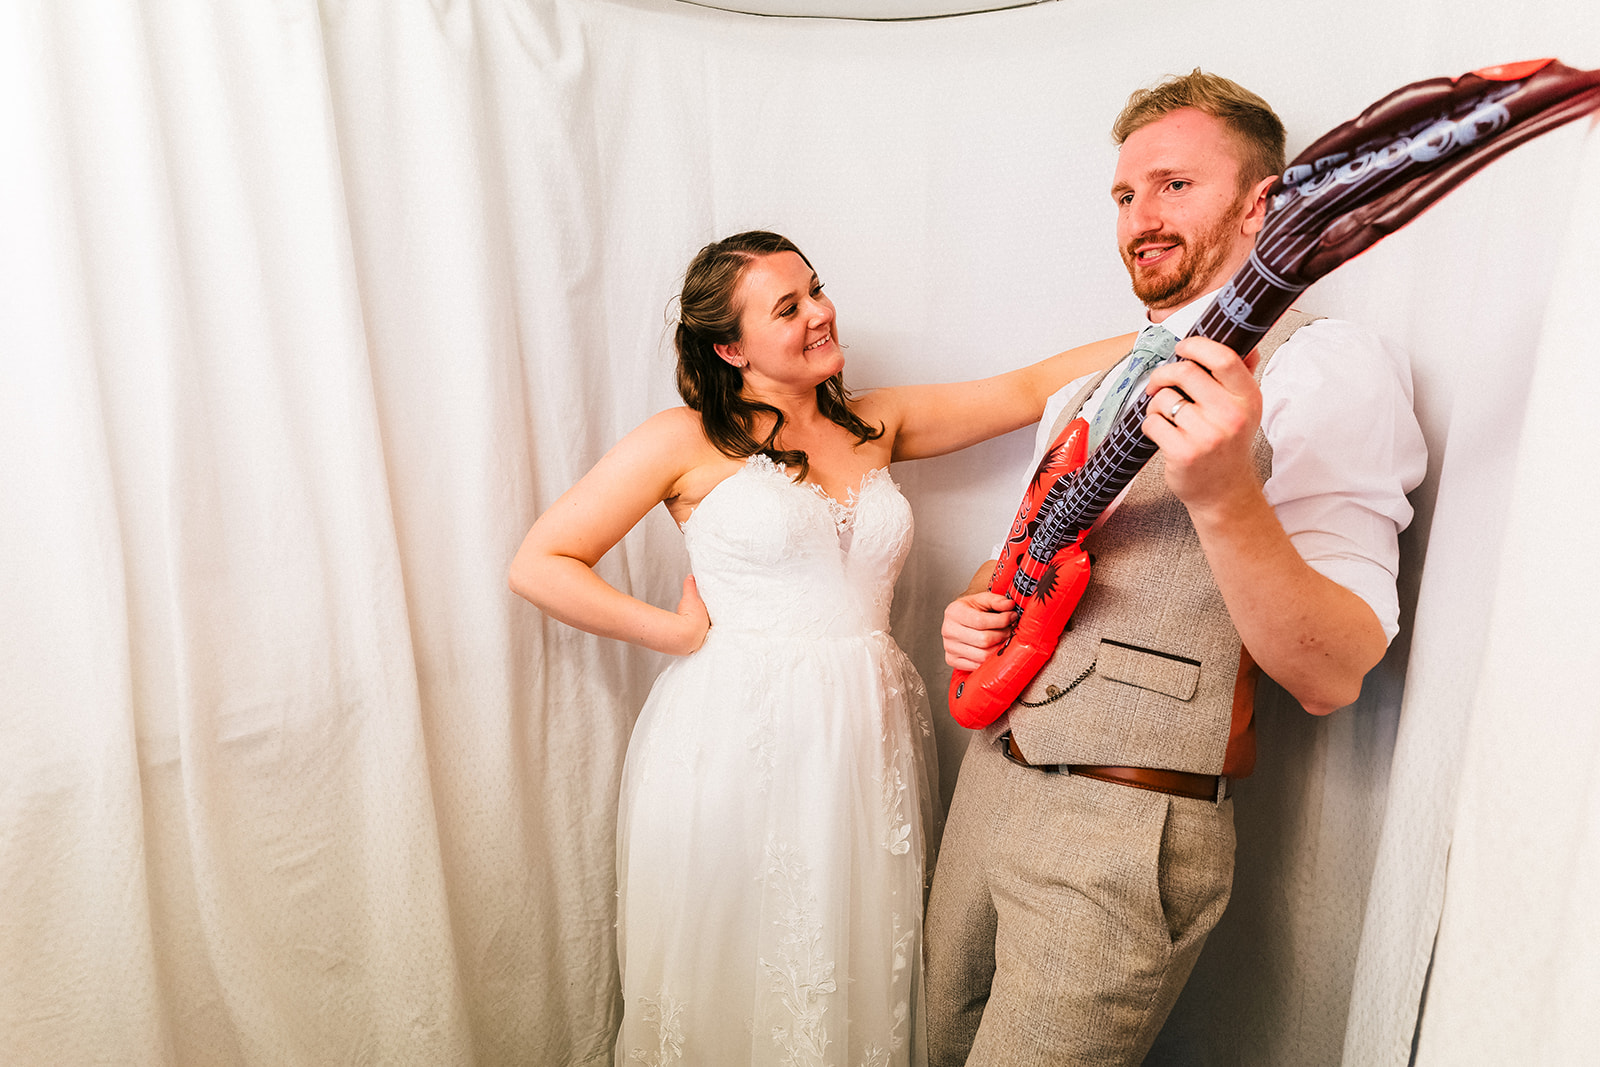 The bride and groom with an inflatable guitar in a photo booth